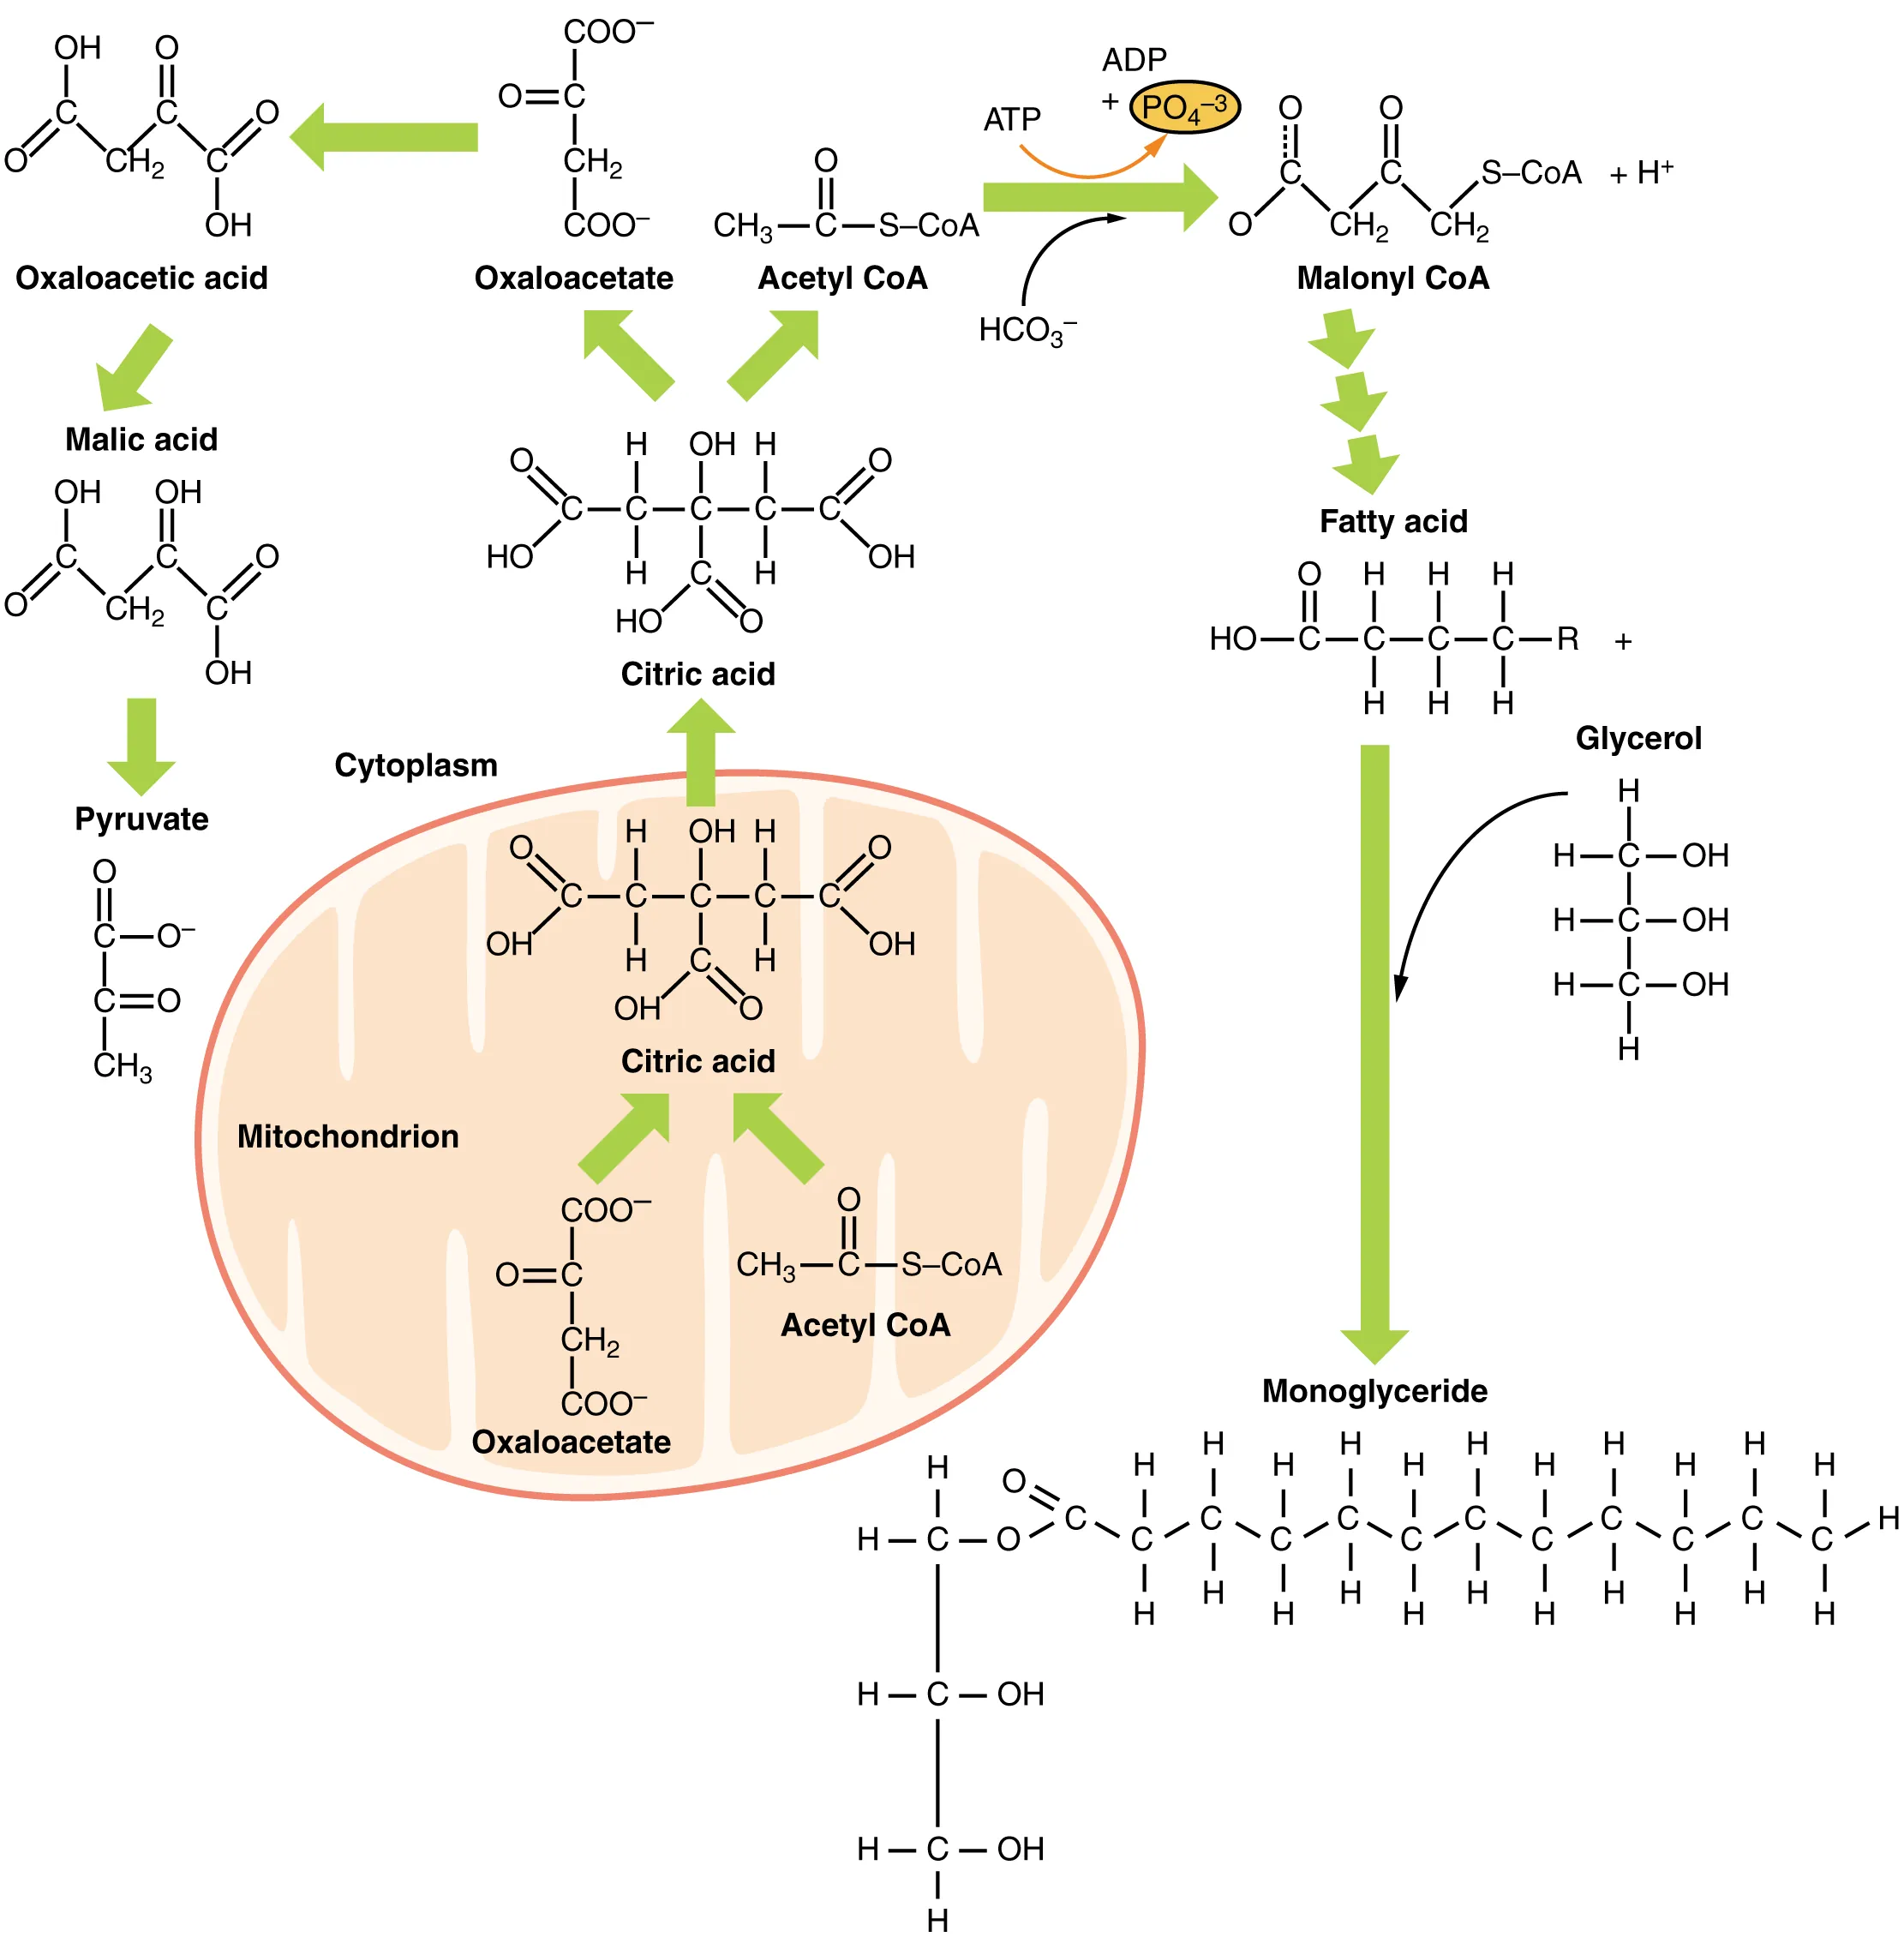 This figure shows the different reactions that take place for lipid metabolism.